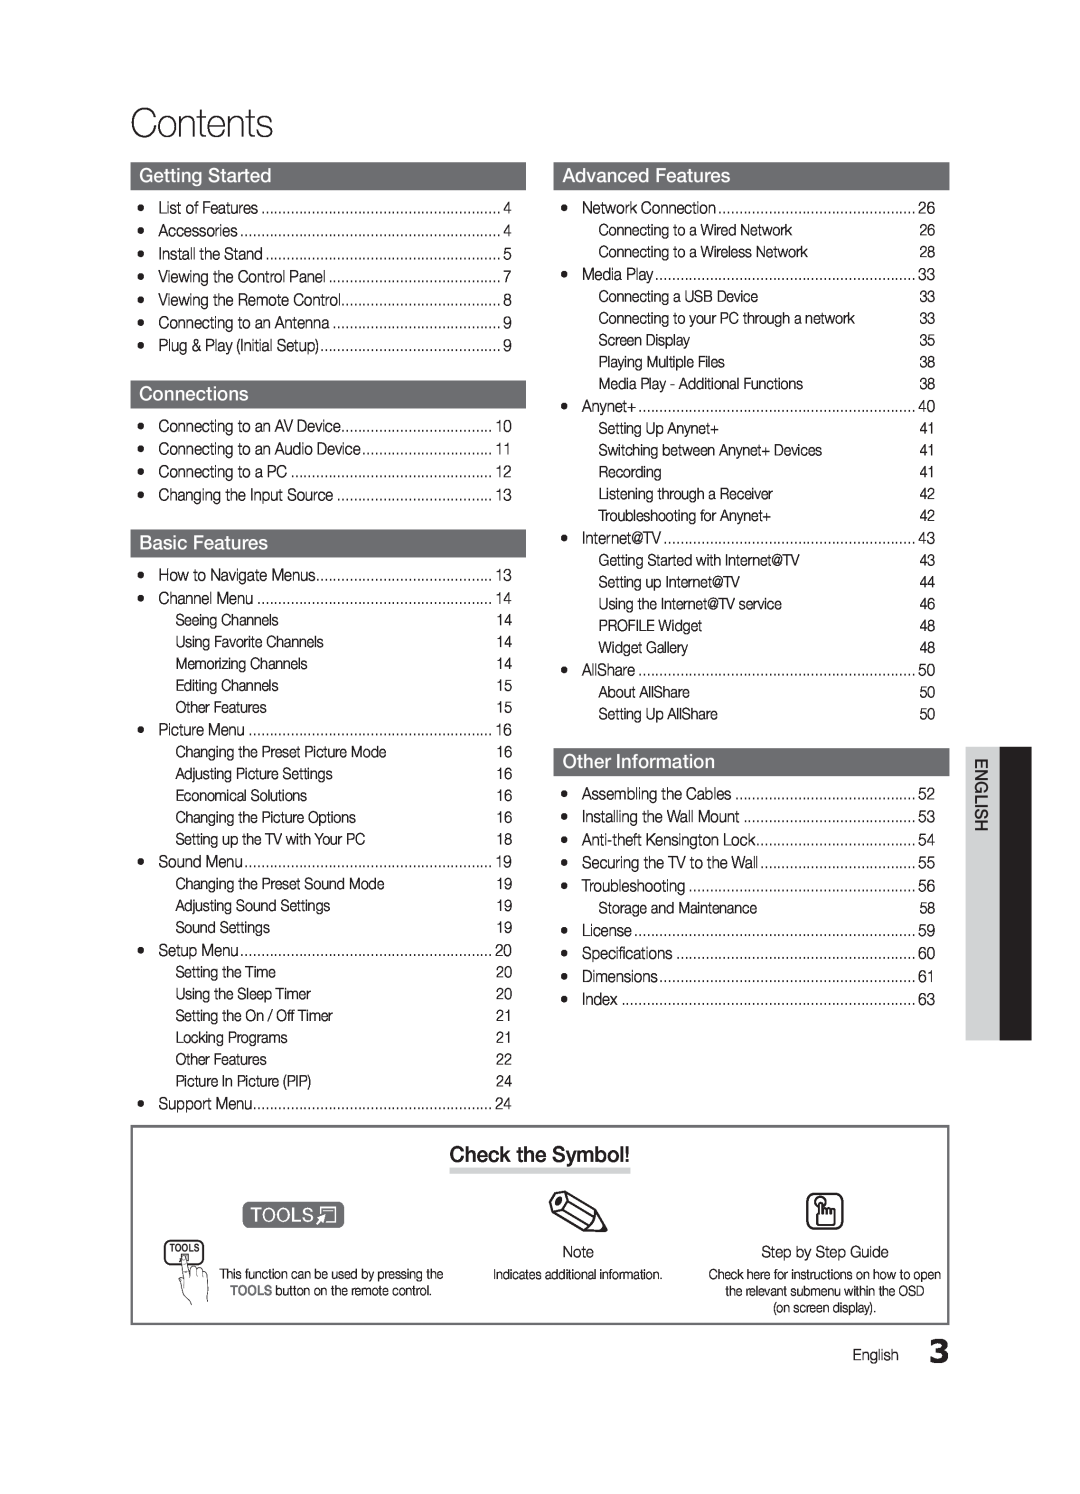 Samsung UC6500-ZC user manual Contents, Check the Symbol, Getting Started, Connections, Basic Features, Advanced Features 